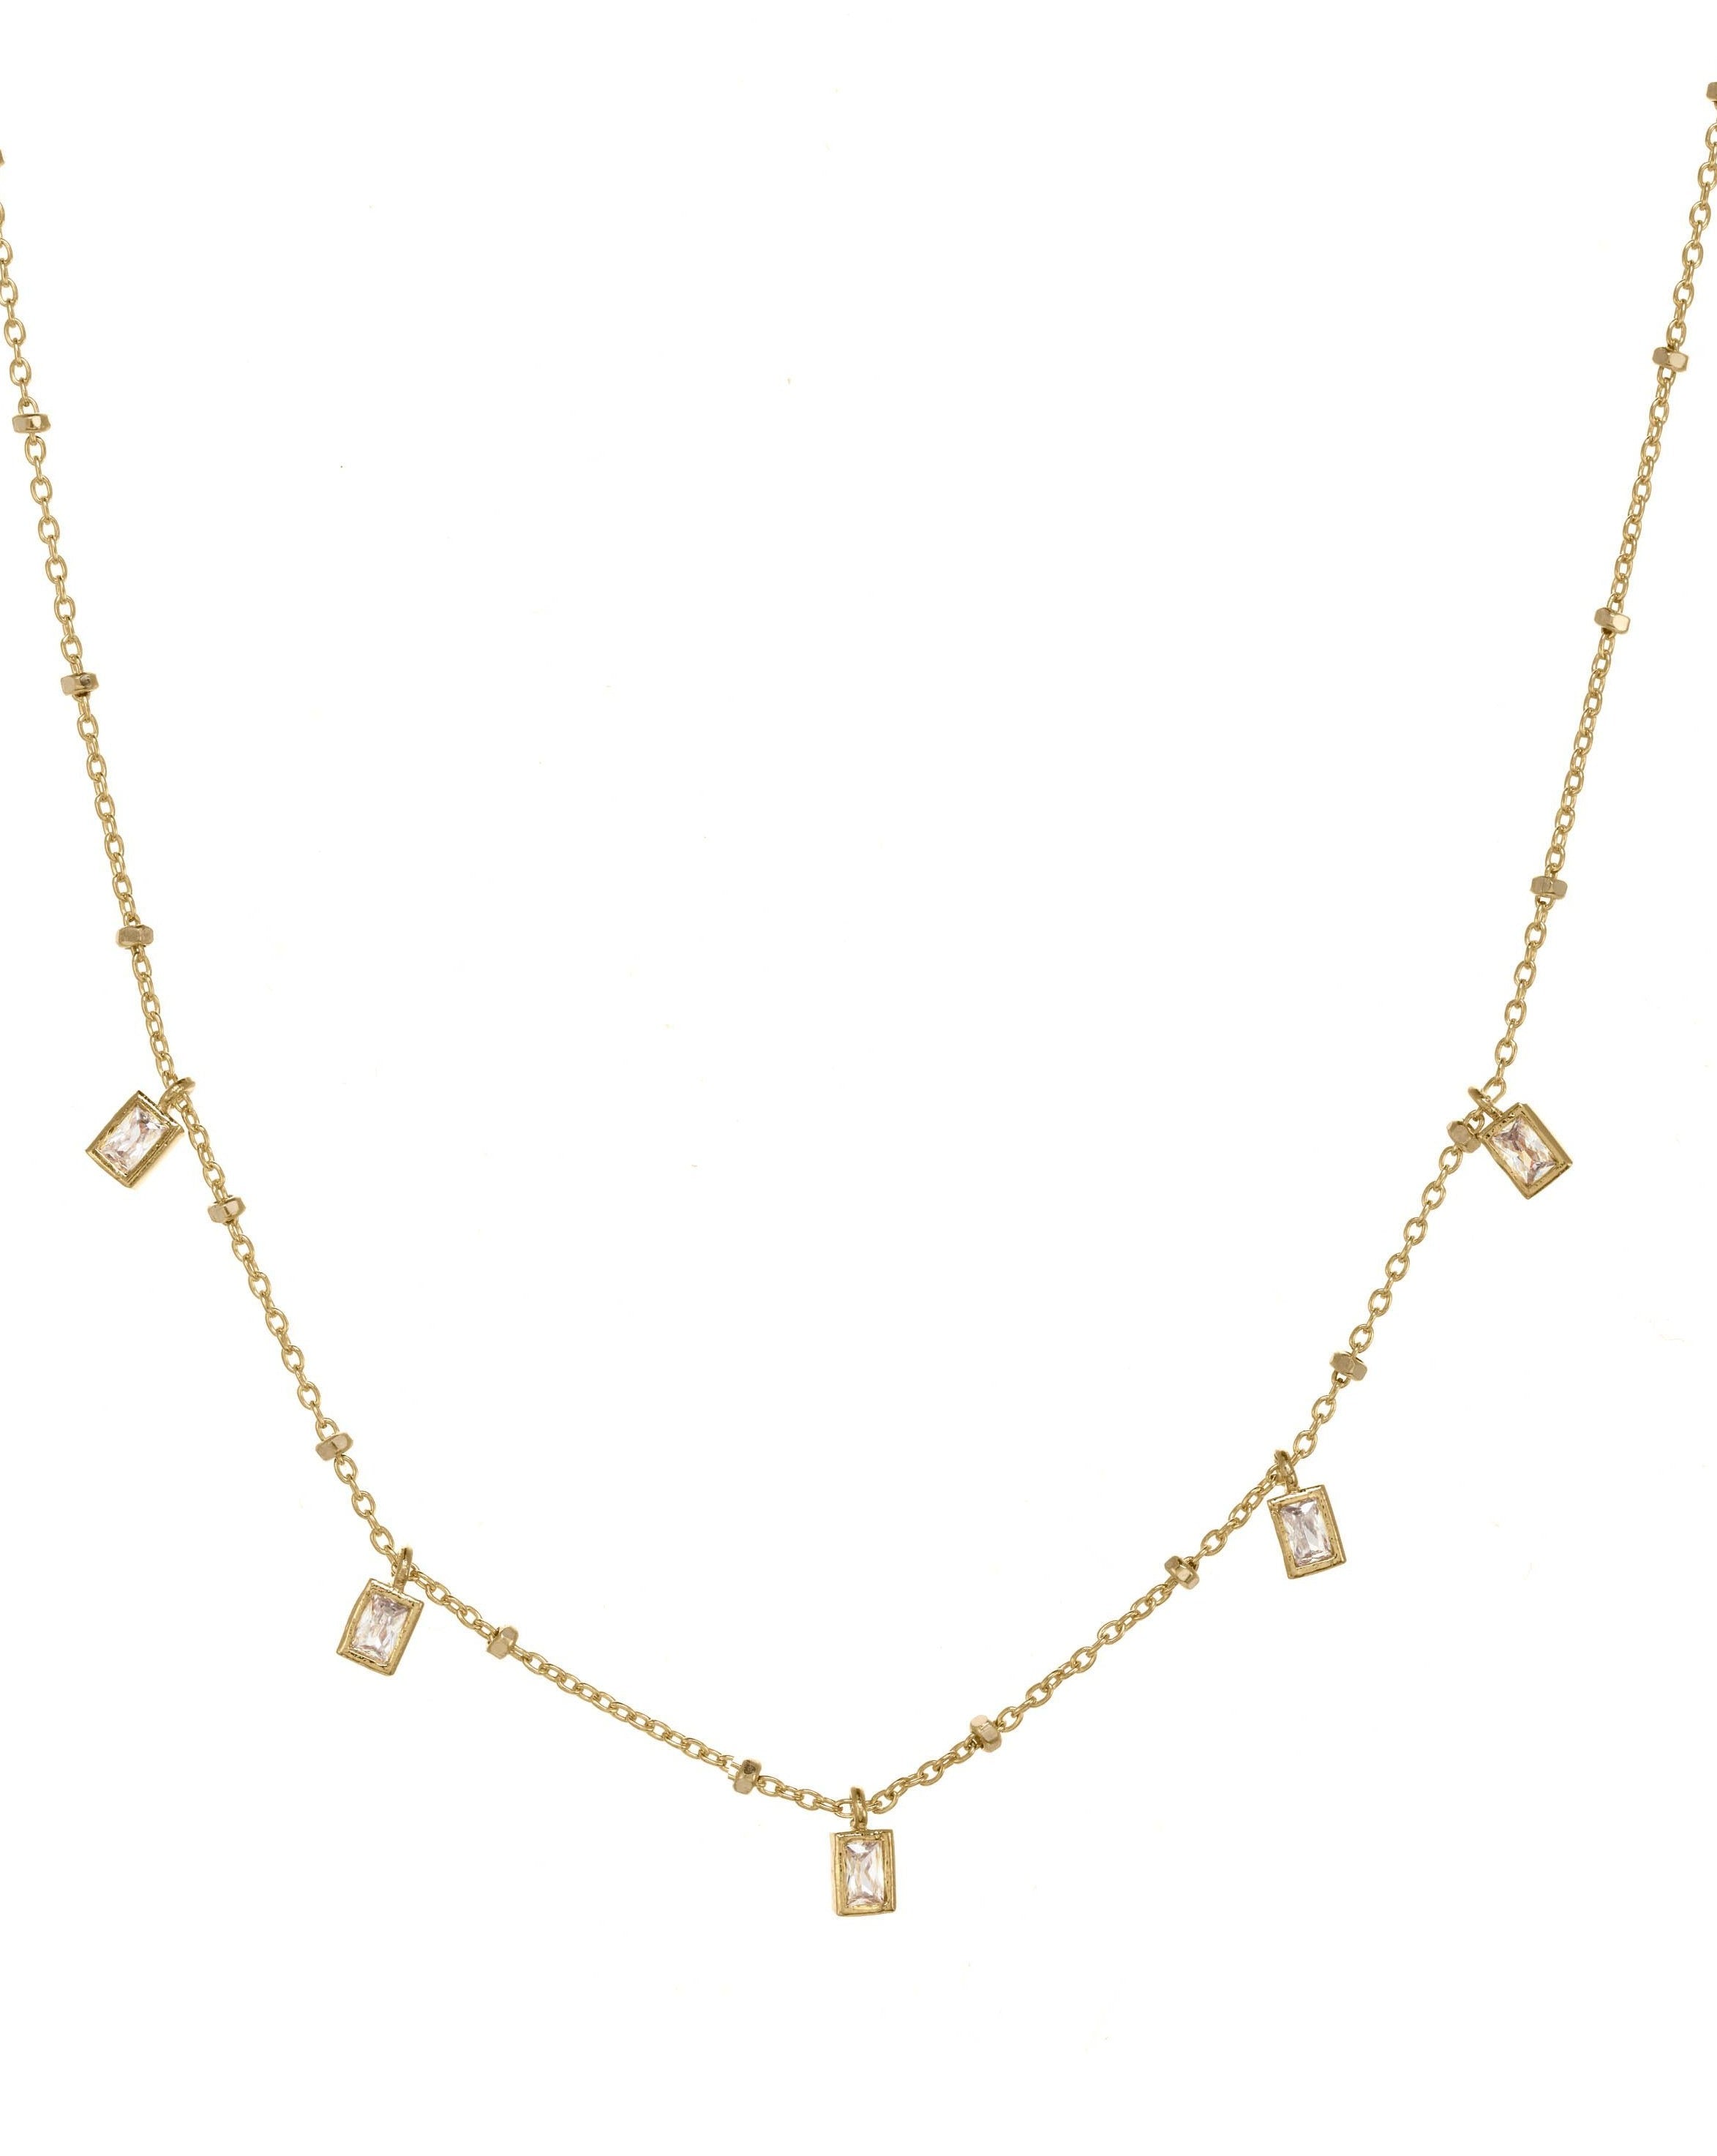 Cinco Necklace by KOZAKH. A 16 inch long necklace in 14K Gold Filled, featuring 3mm rectangular Cubic Zirconias.